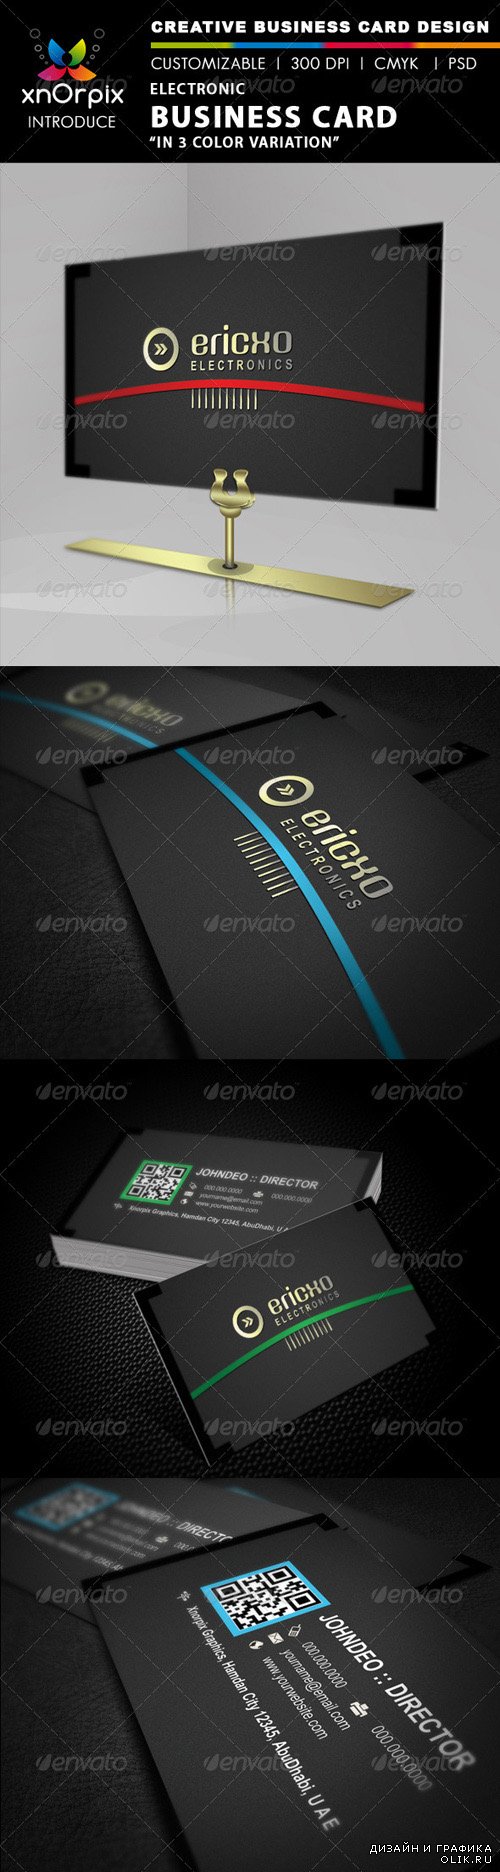 Electro Business Card - PSD template